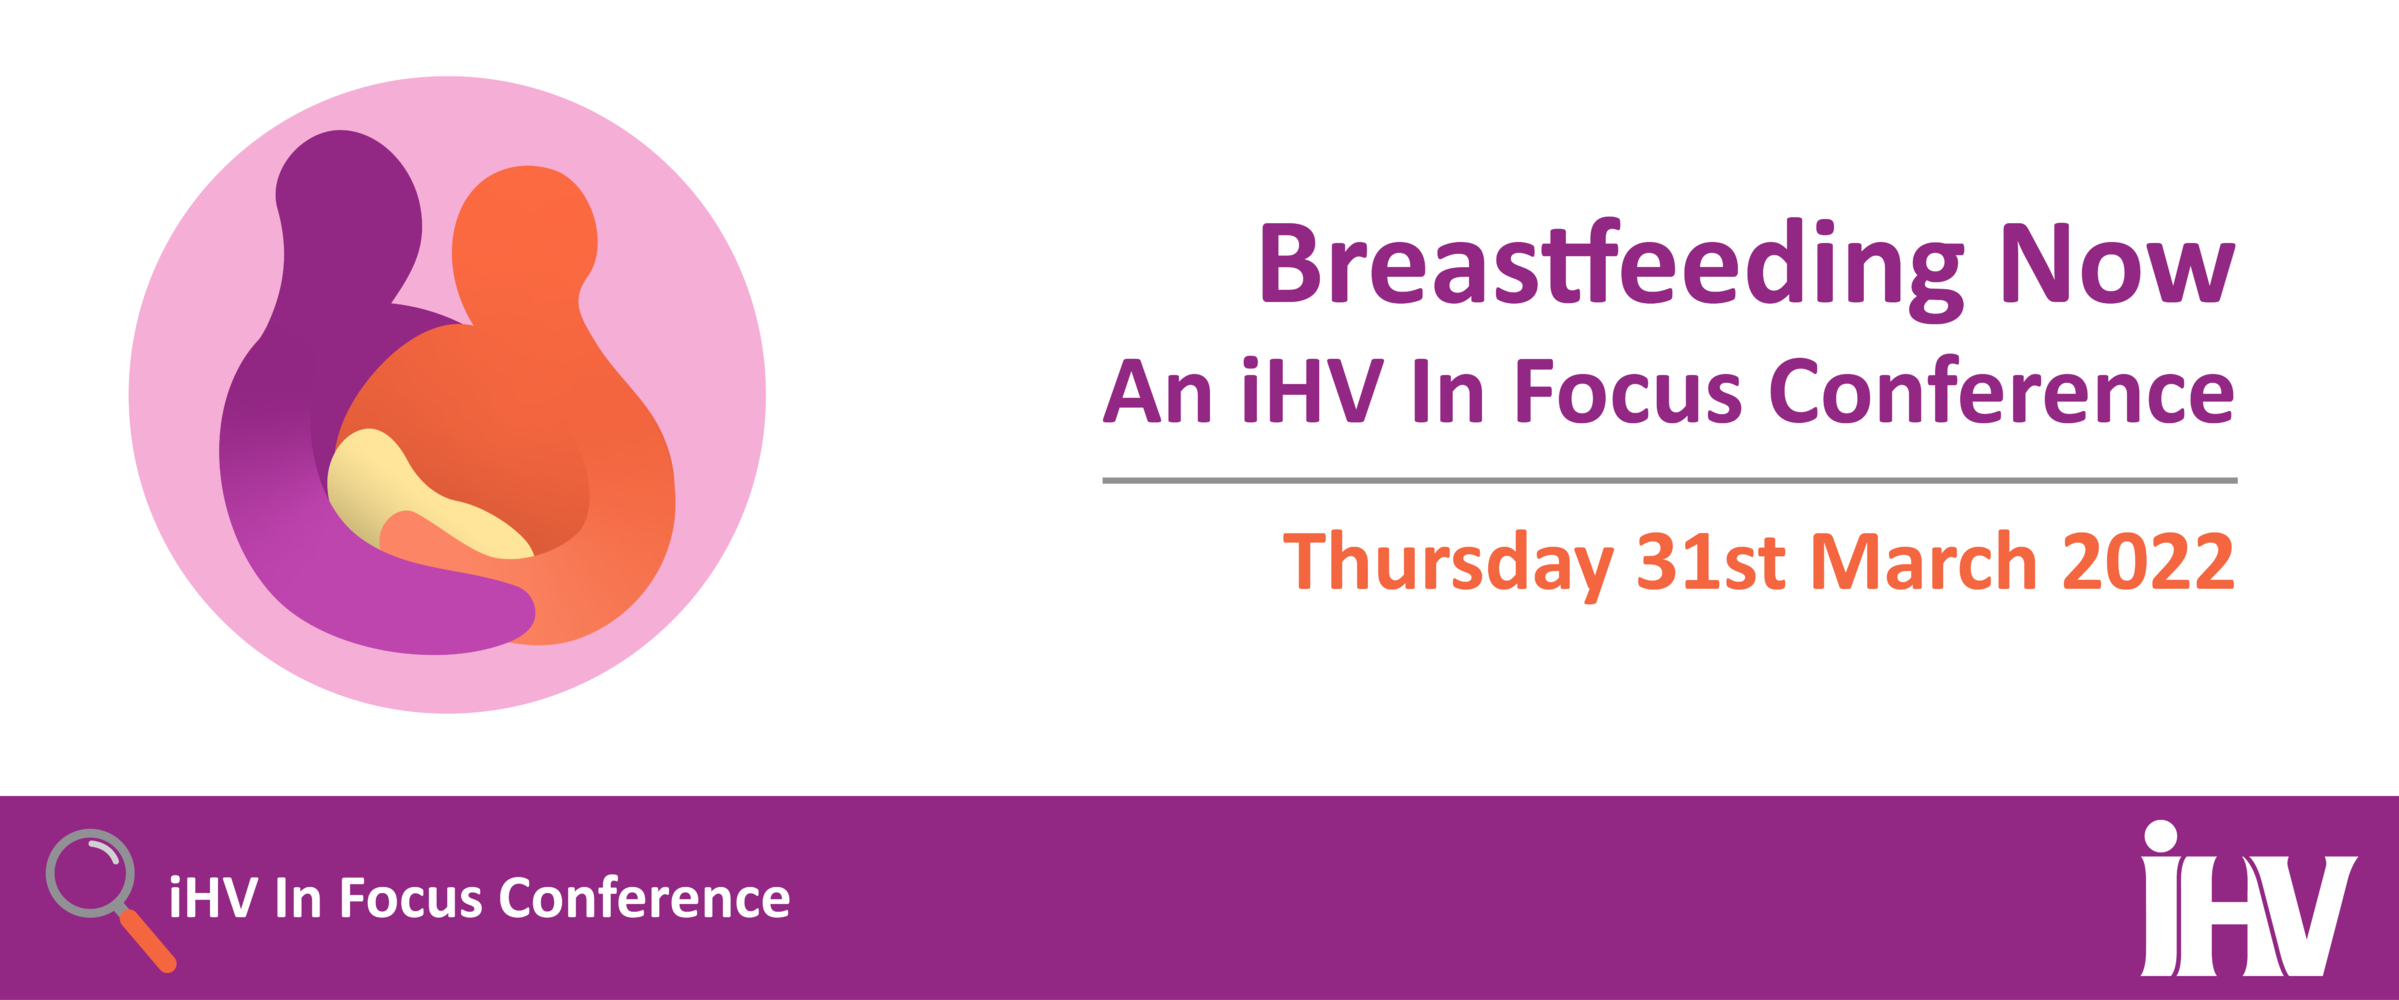 iHV In Focus Conference: Breastfeeding Now